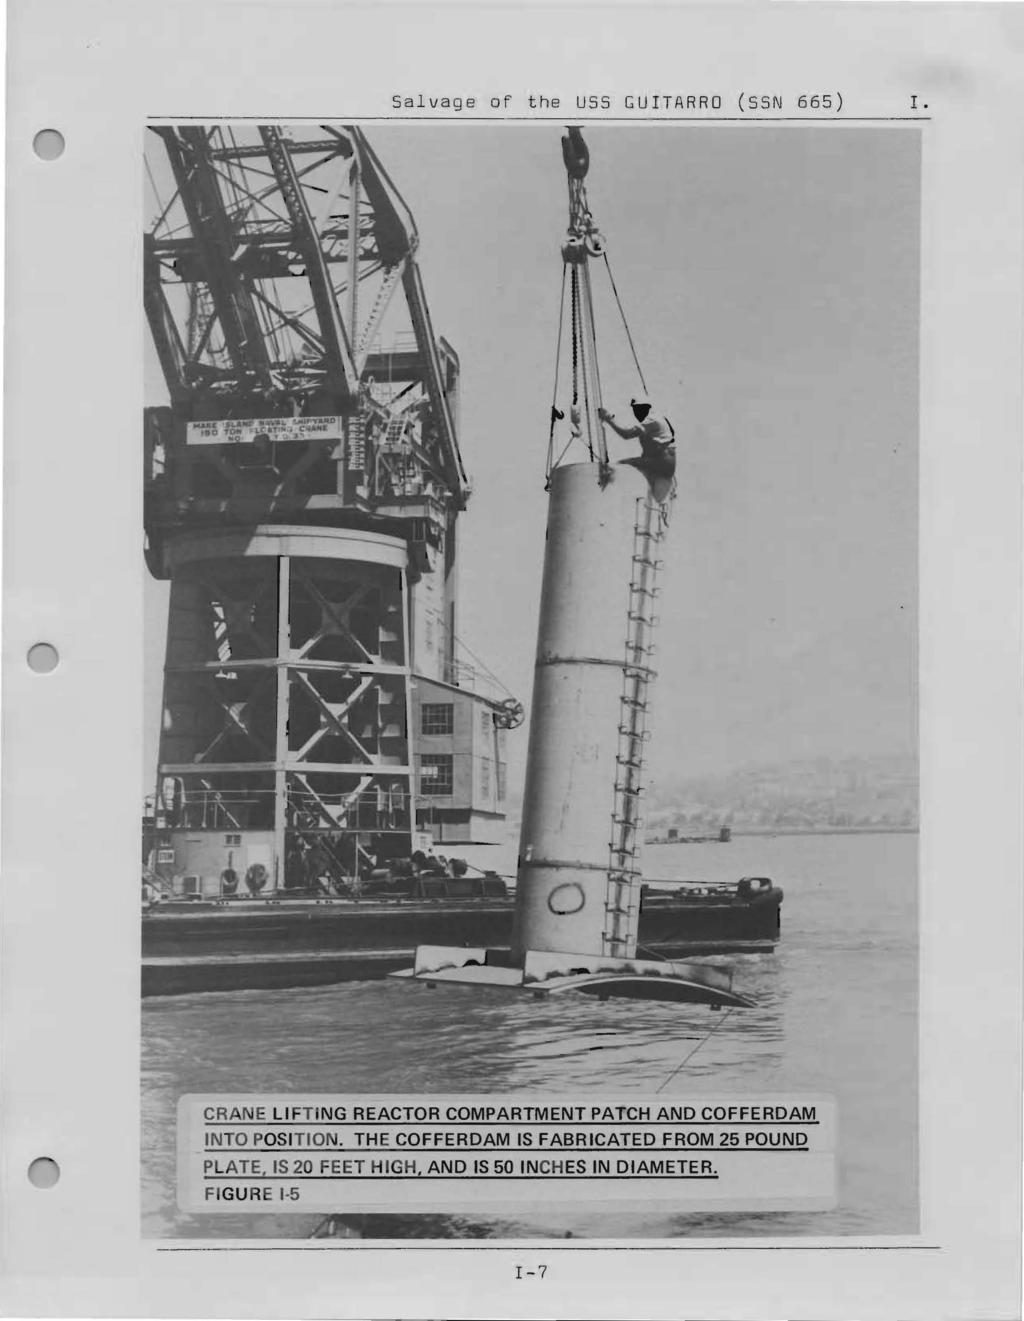 Salvage of the USS GU1TARRO (SSN 665) I. CRANE LIFT ING REACTOR COMPARTMENT PATCH AND COFFERDAM INTO POSITION.